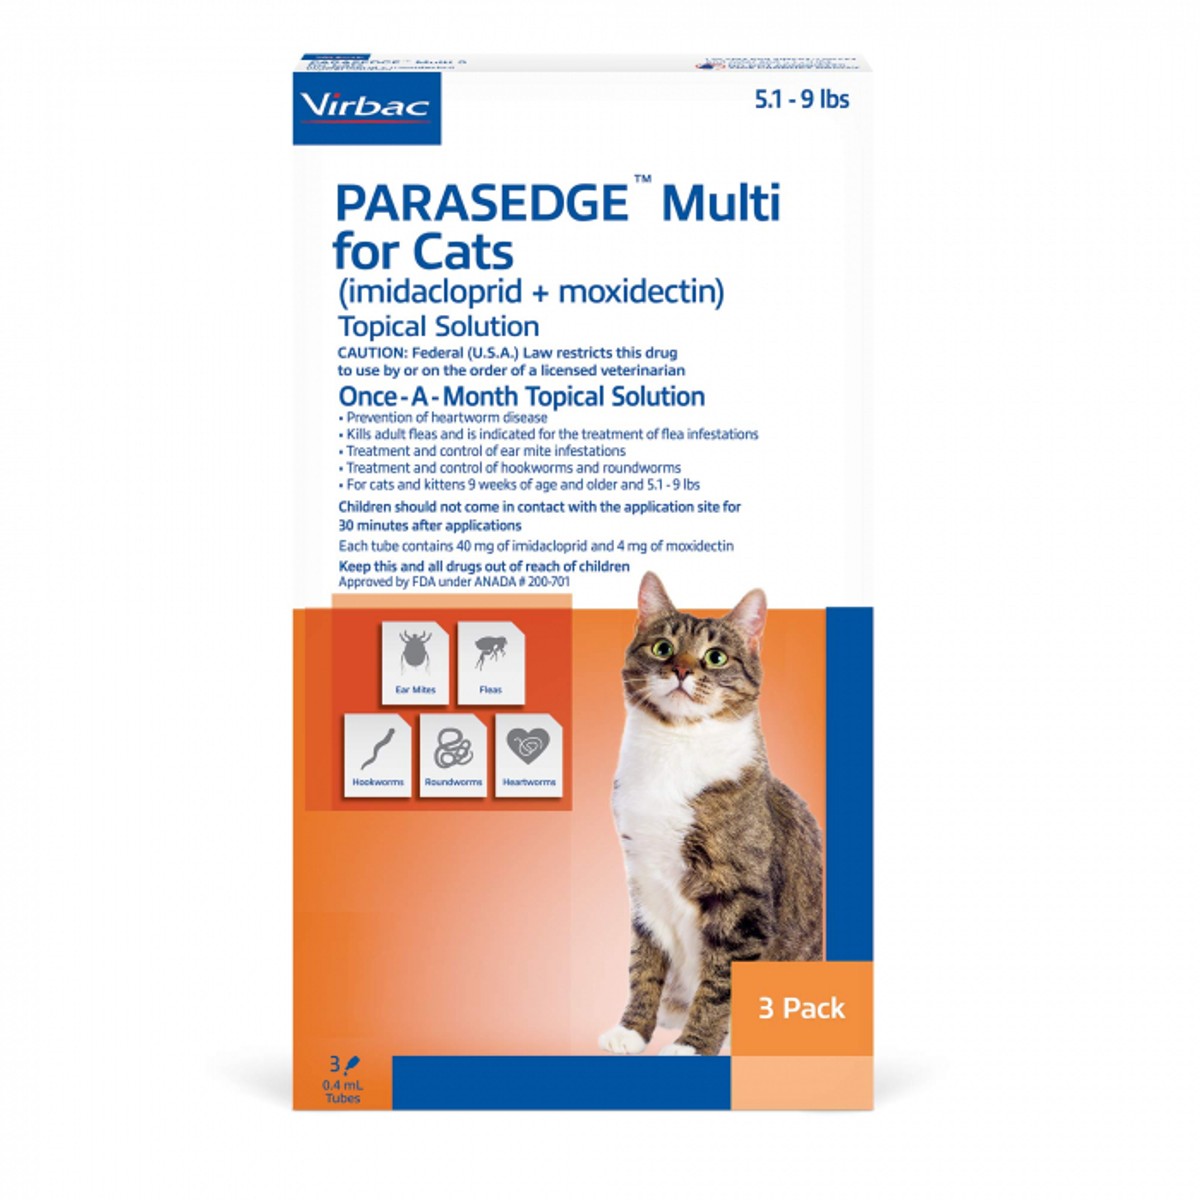 Parasedge Multi TOPICAL SOLN for Cats